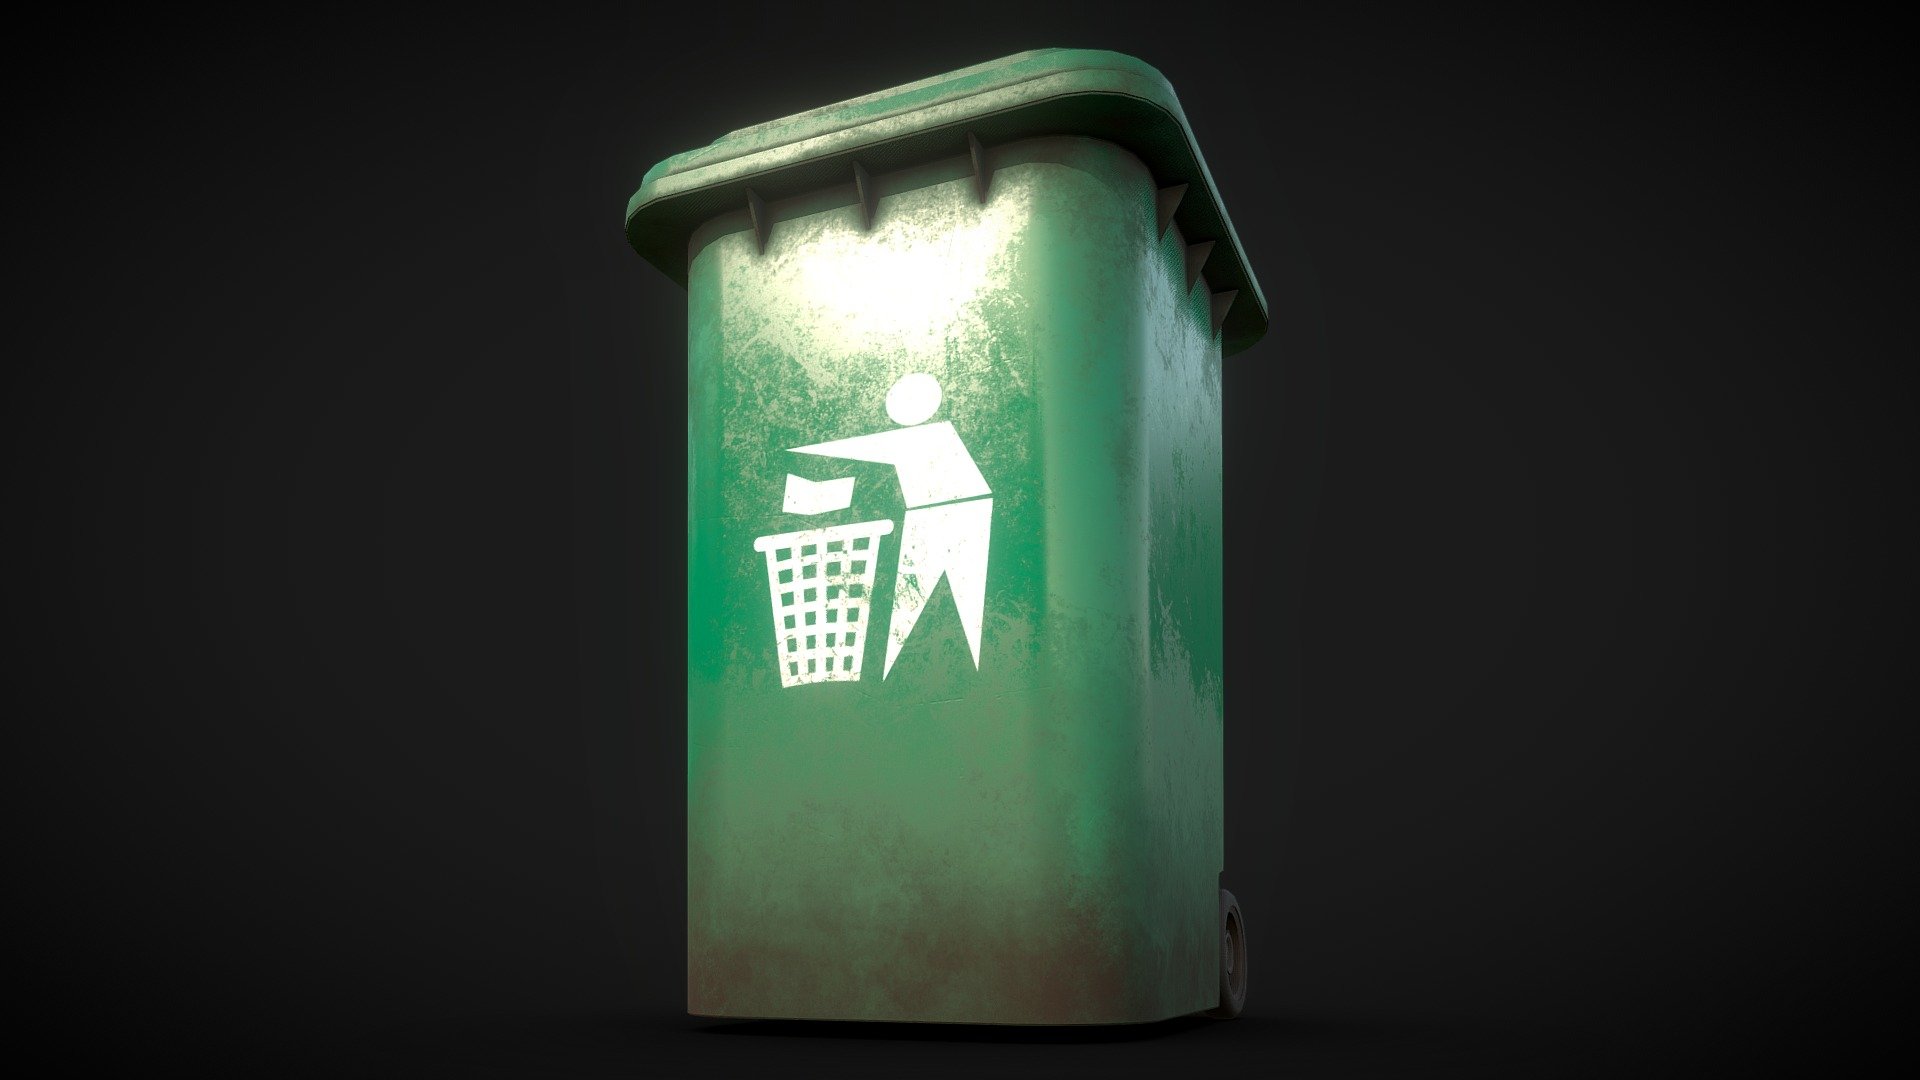 Dirty Dustbin - Low Poly - PBR Textures
Game Ready / Unreal Engine / Unity - Directly import with texture maps and start using.
Contact me if you want more assets like these - dsaalister@gmail.com
https://www.instagram.com/p/Cdnk5jajFgl/?hl=en - Dirty Dustbin - Download Free 3D model by Allay Design (@Alister.Dsa) 3d model